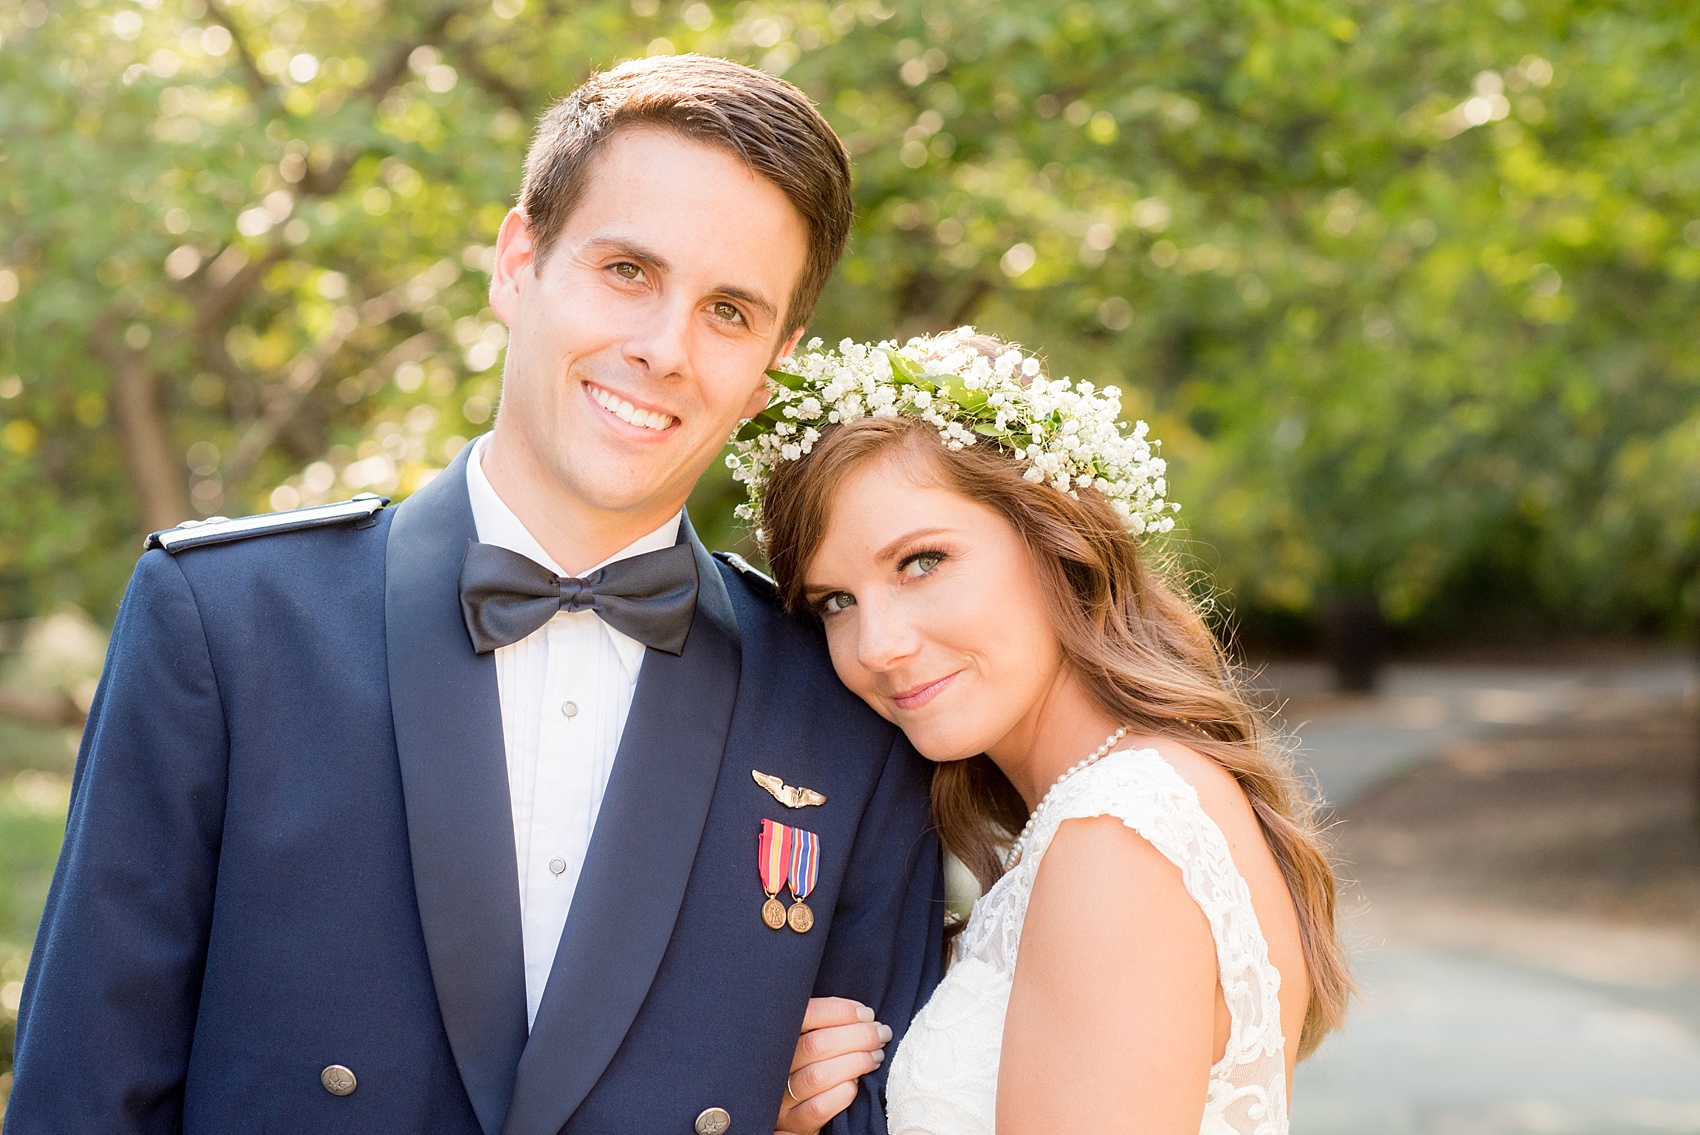 Mikkel Paige Photography photo of a Duke Chapel wedding in Durham, North Carolina. The bride in her Baby's Breath floral crown and groom in his navy blue Air Force uniform.